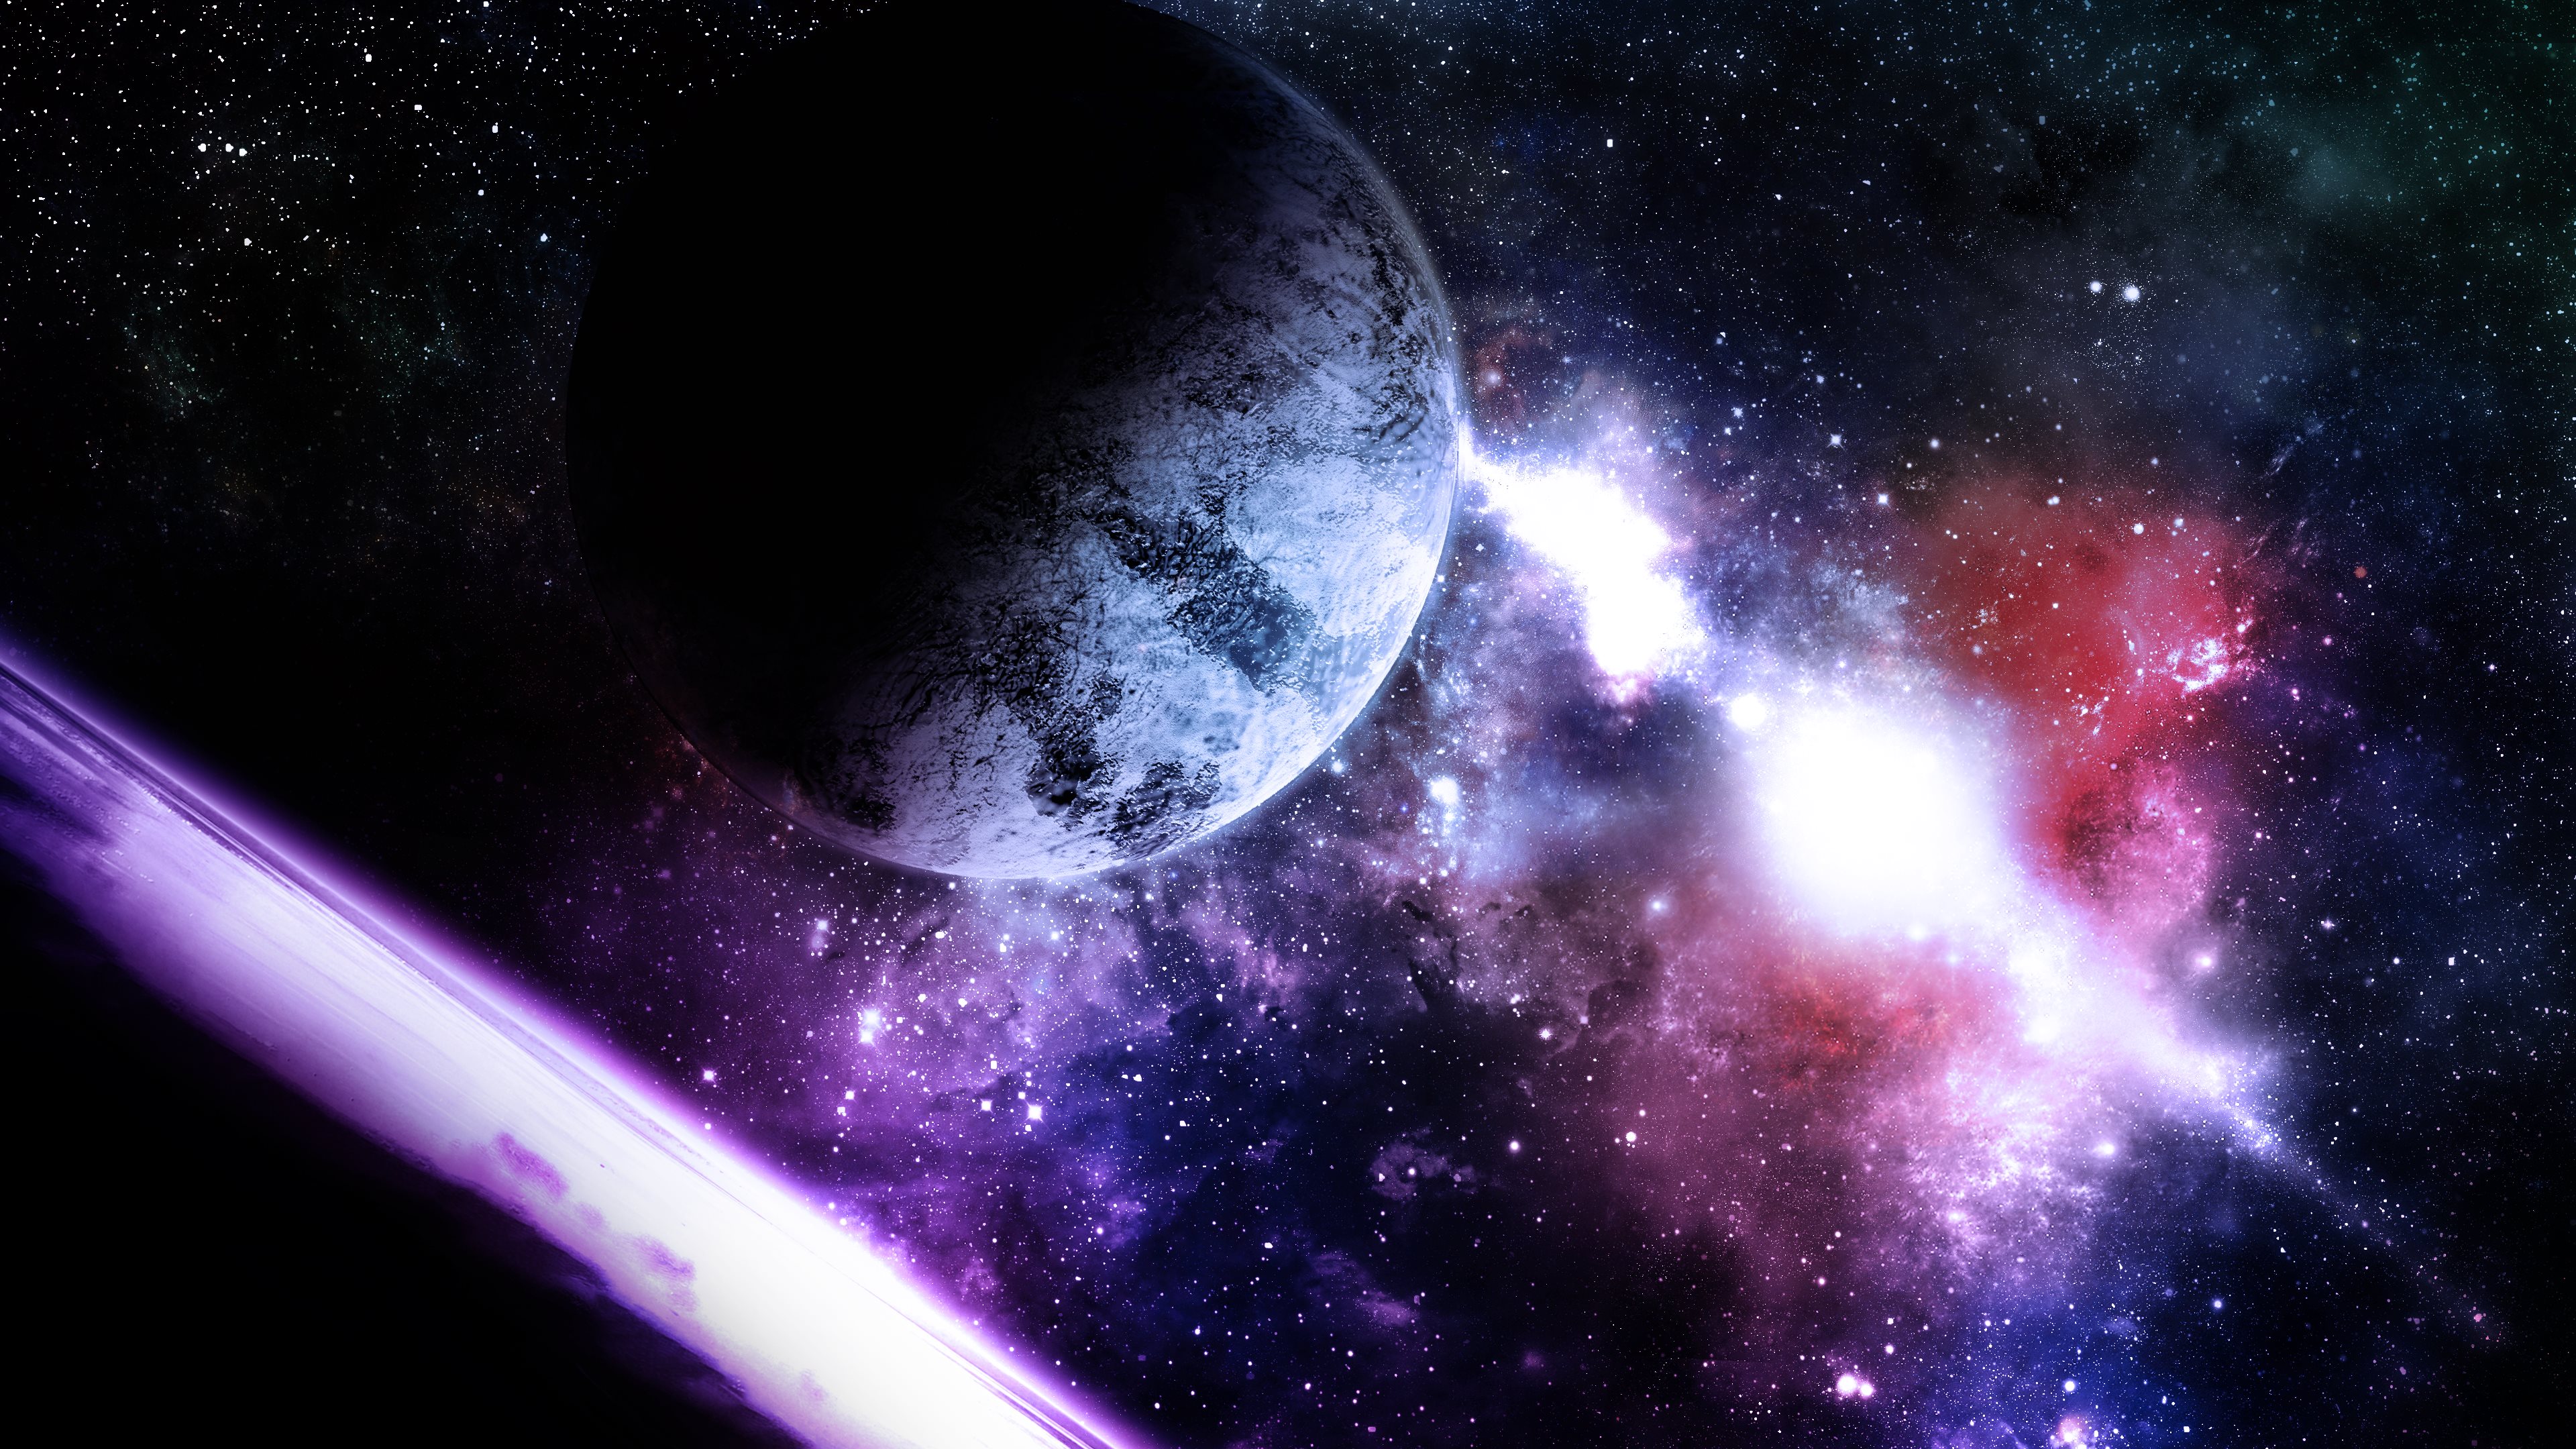 space themed wallpaper,outer space,astronomical object,universe,galaxy,space